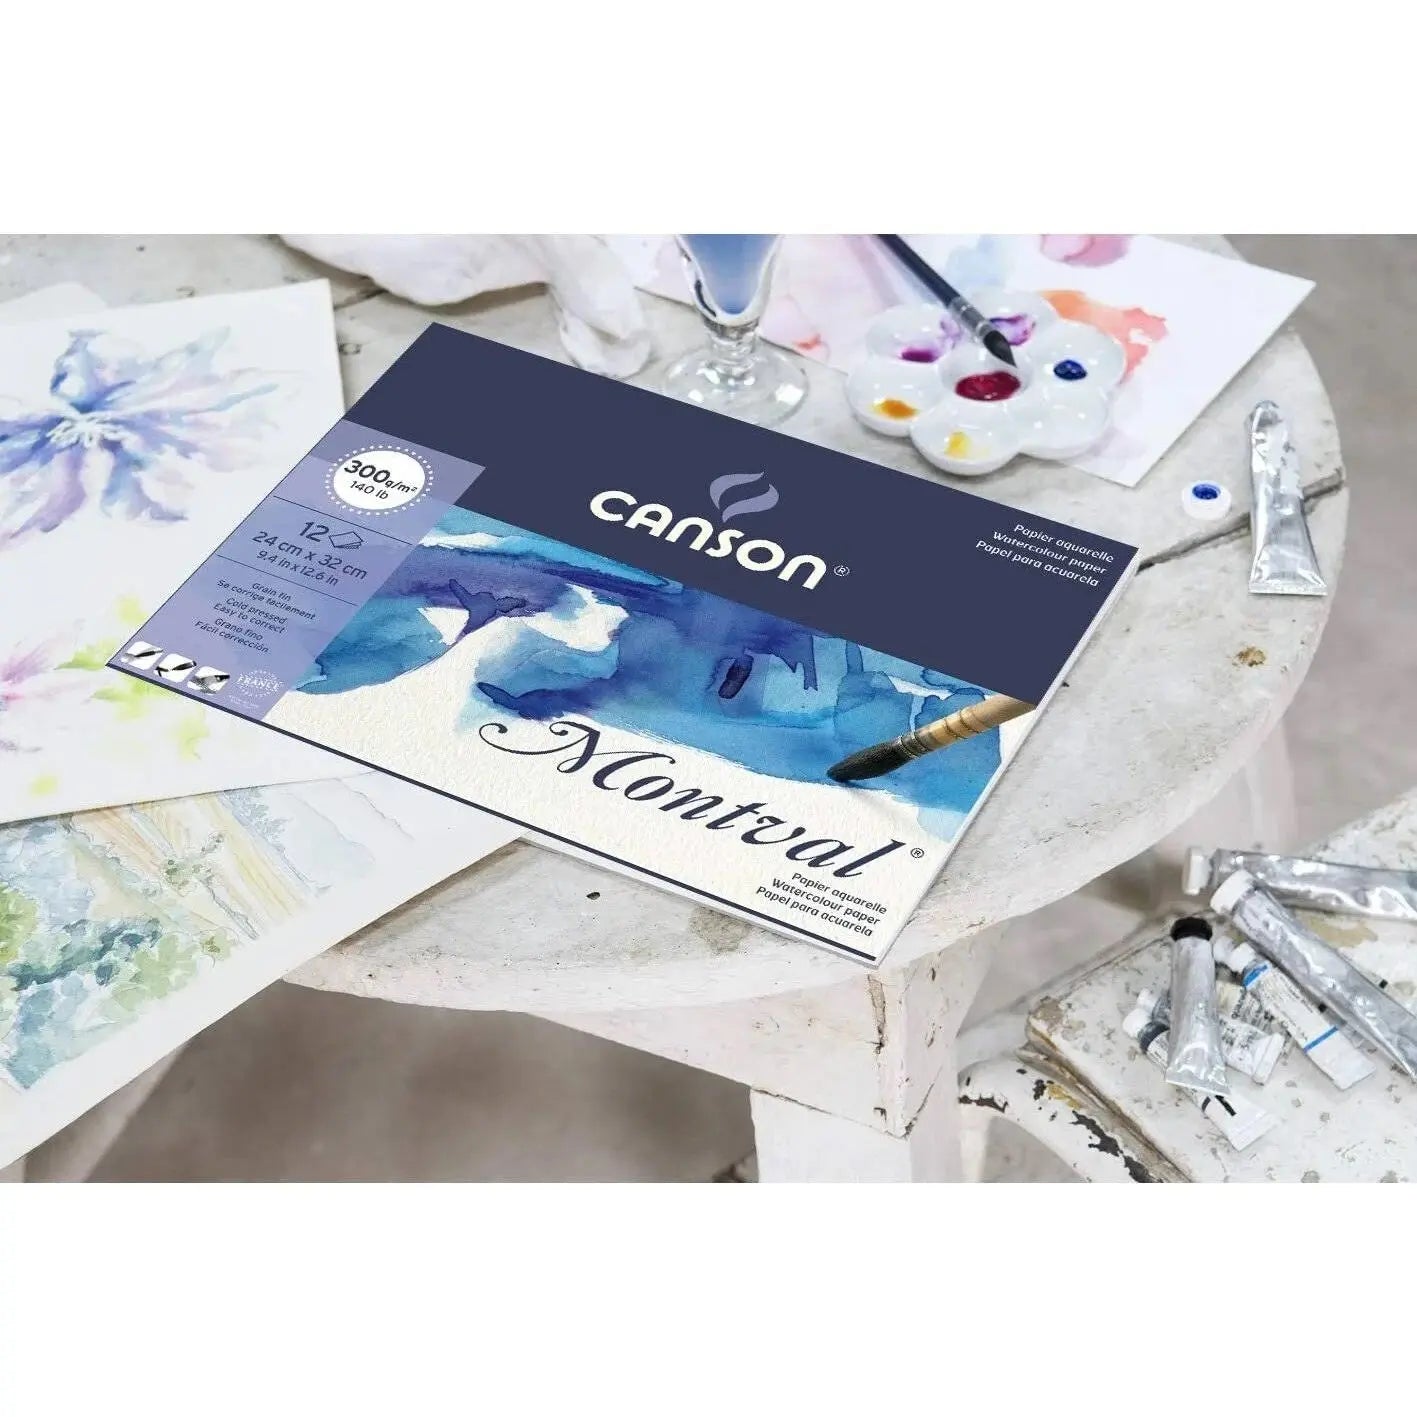 Canson Montval Watercolour Paper (185-300 GSM) Canson